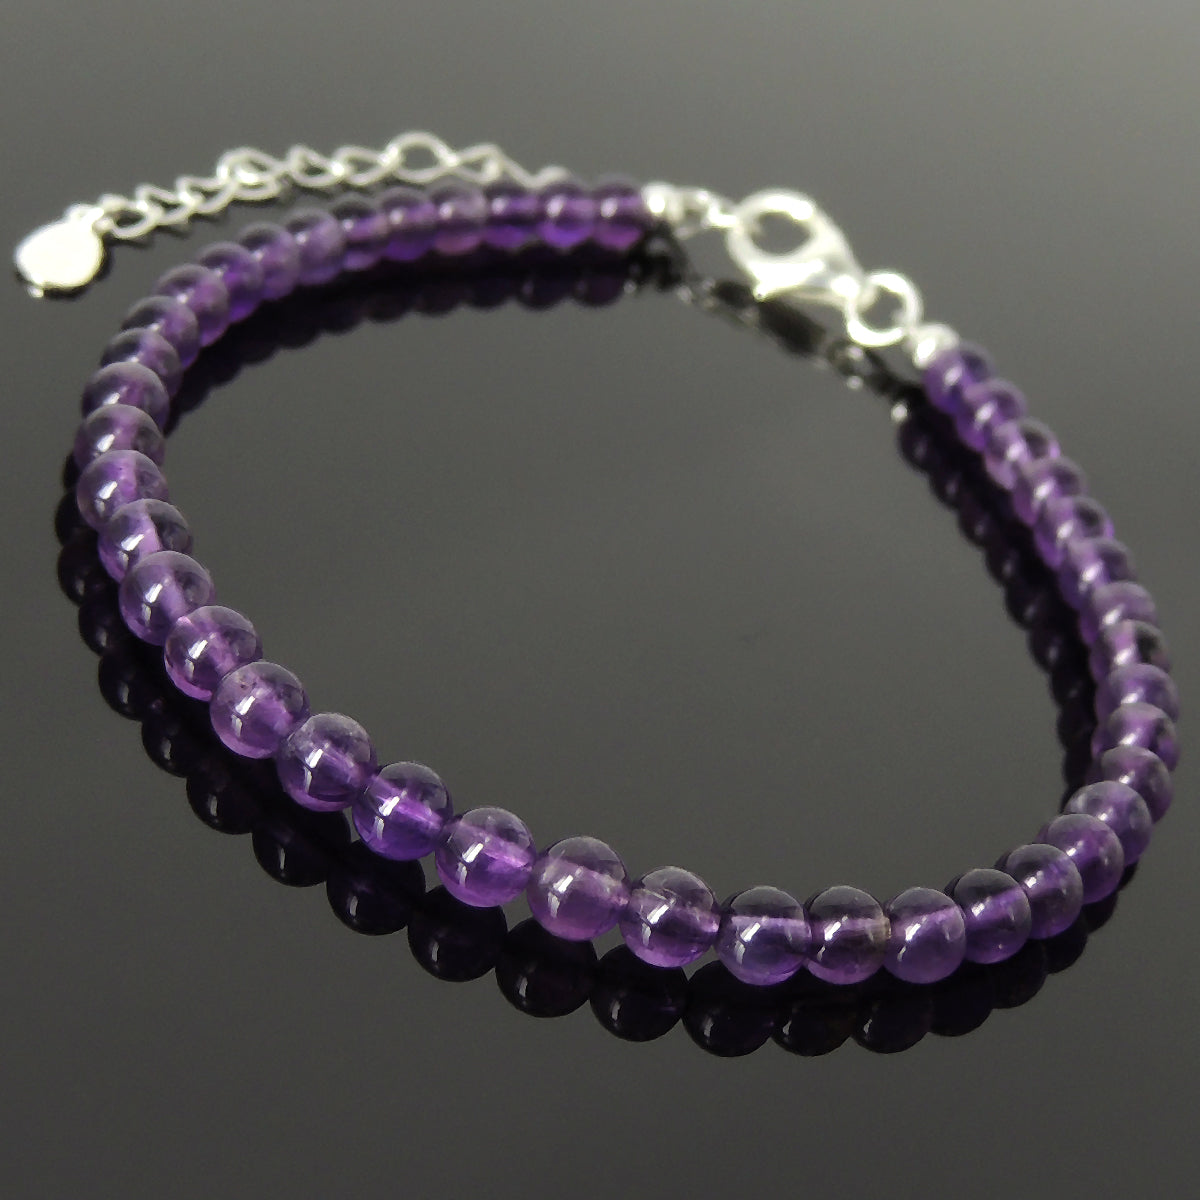 4mm Amethyst Healing Gemstone Bracelet with S925 Sterling Silver Chain & Clasp - Handmade by Gem & Silver BR1261